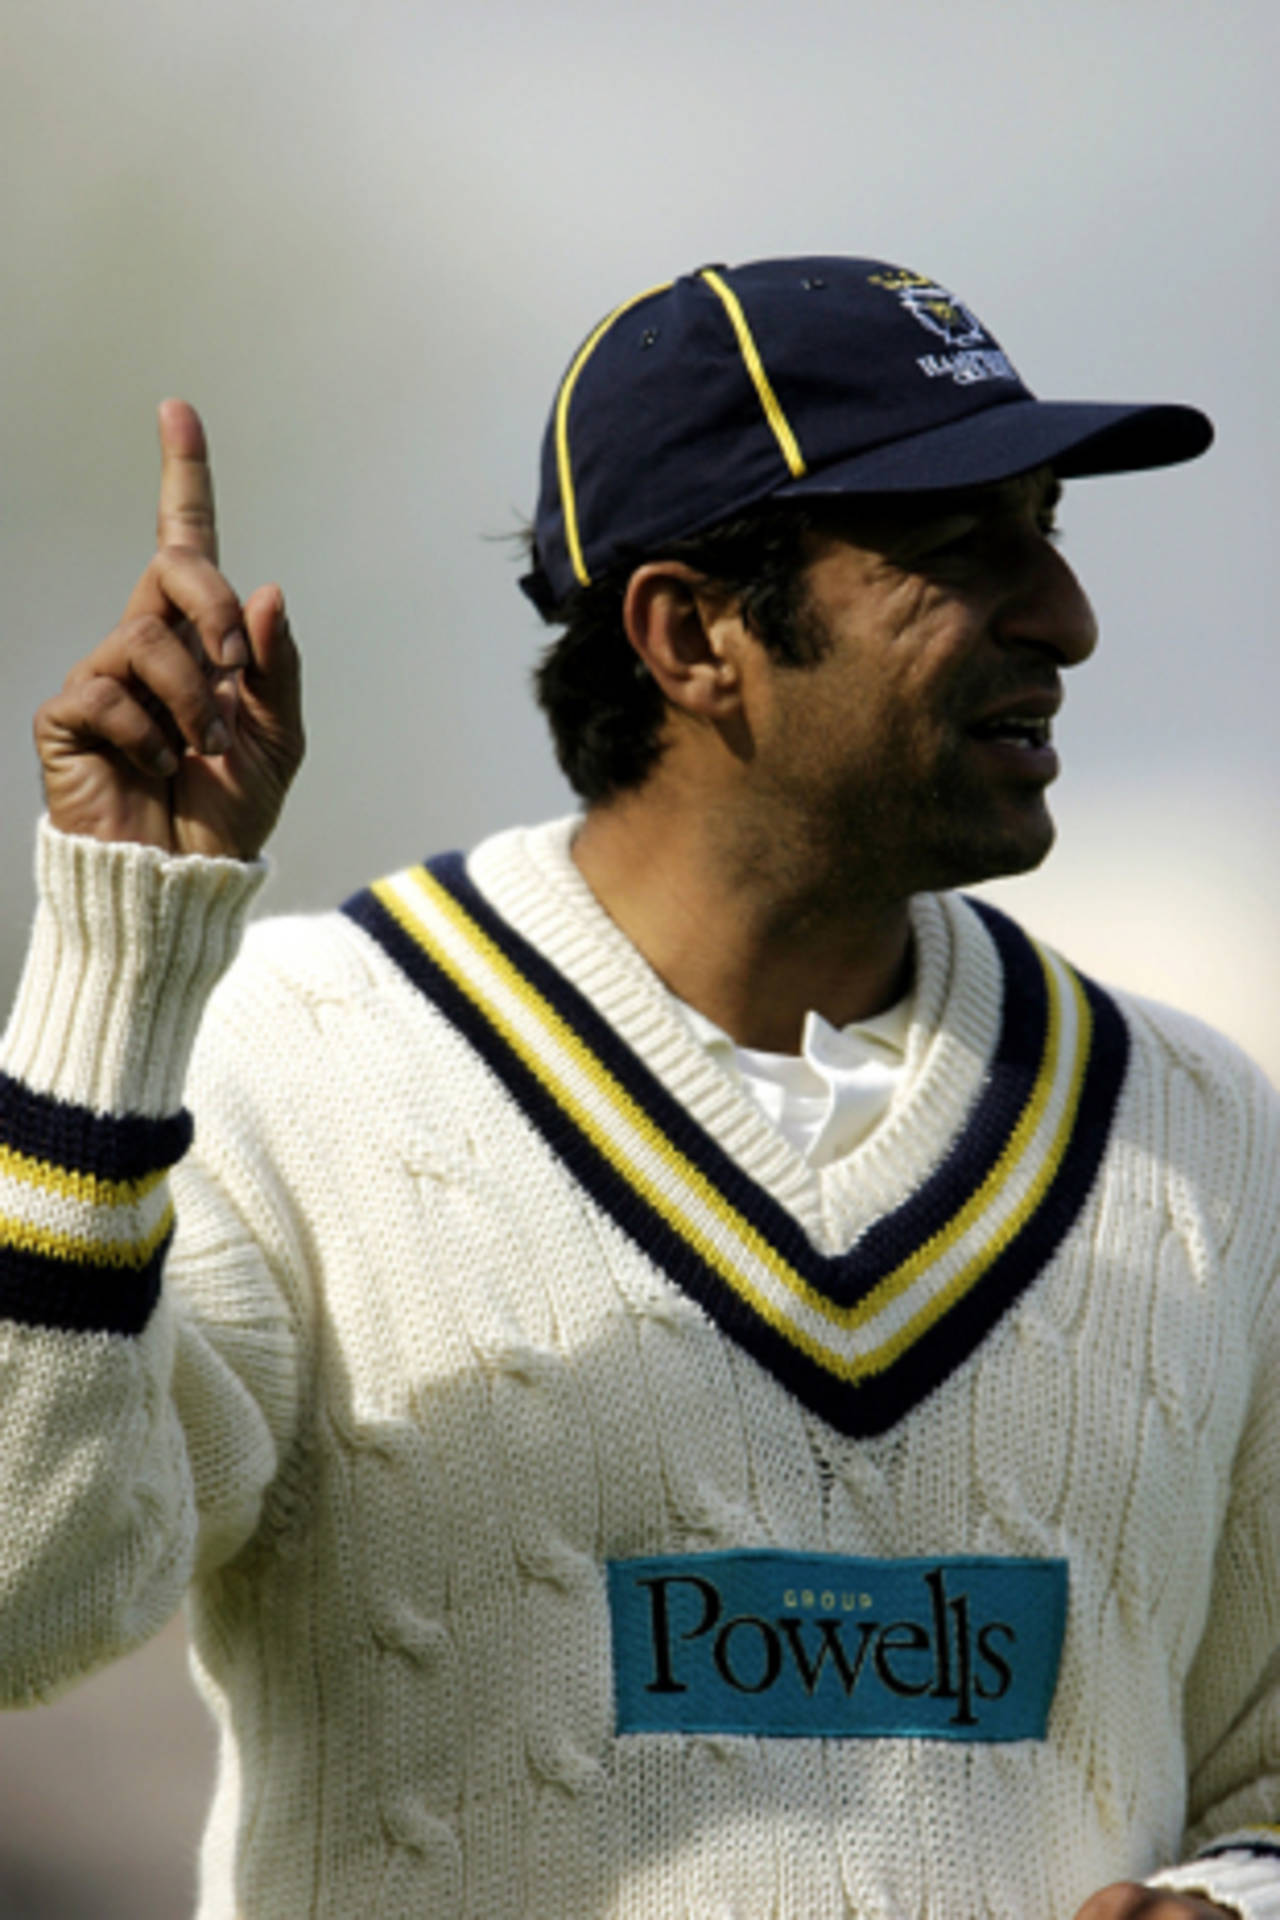 Wasim Akram on his late wife Huma: "She has been a rock to me in so many ways, not least in getting me mentally strong for challenges on the field"&nbsp;&nbsp;&bull;&nbsp;&nbsp;Julian Herbert/Getty Images